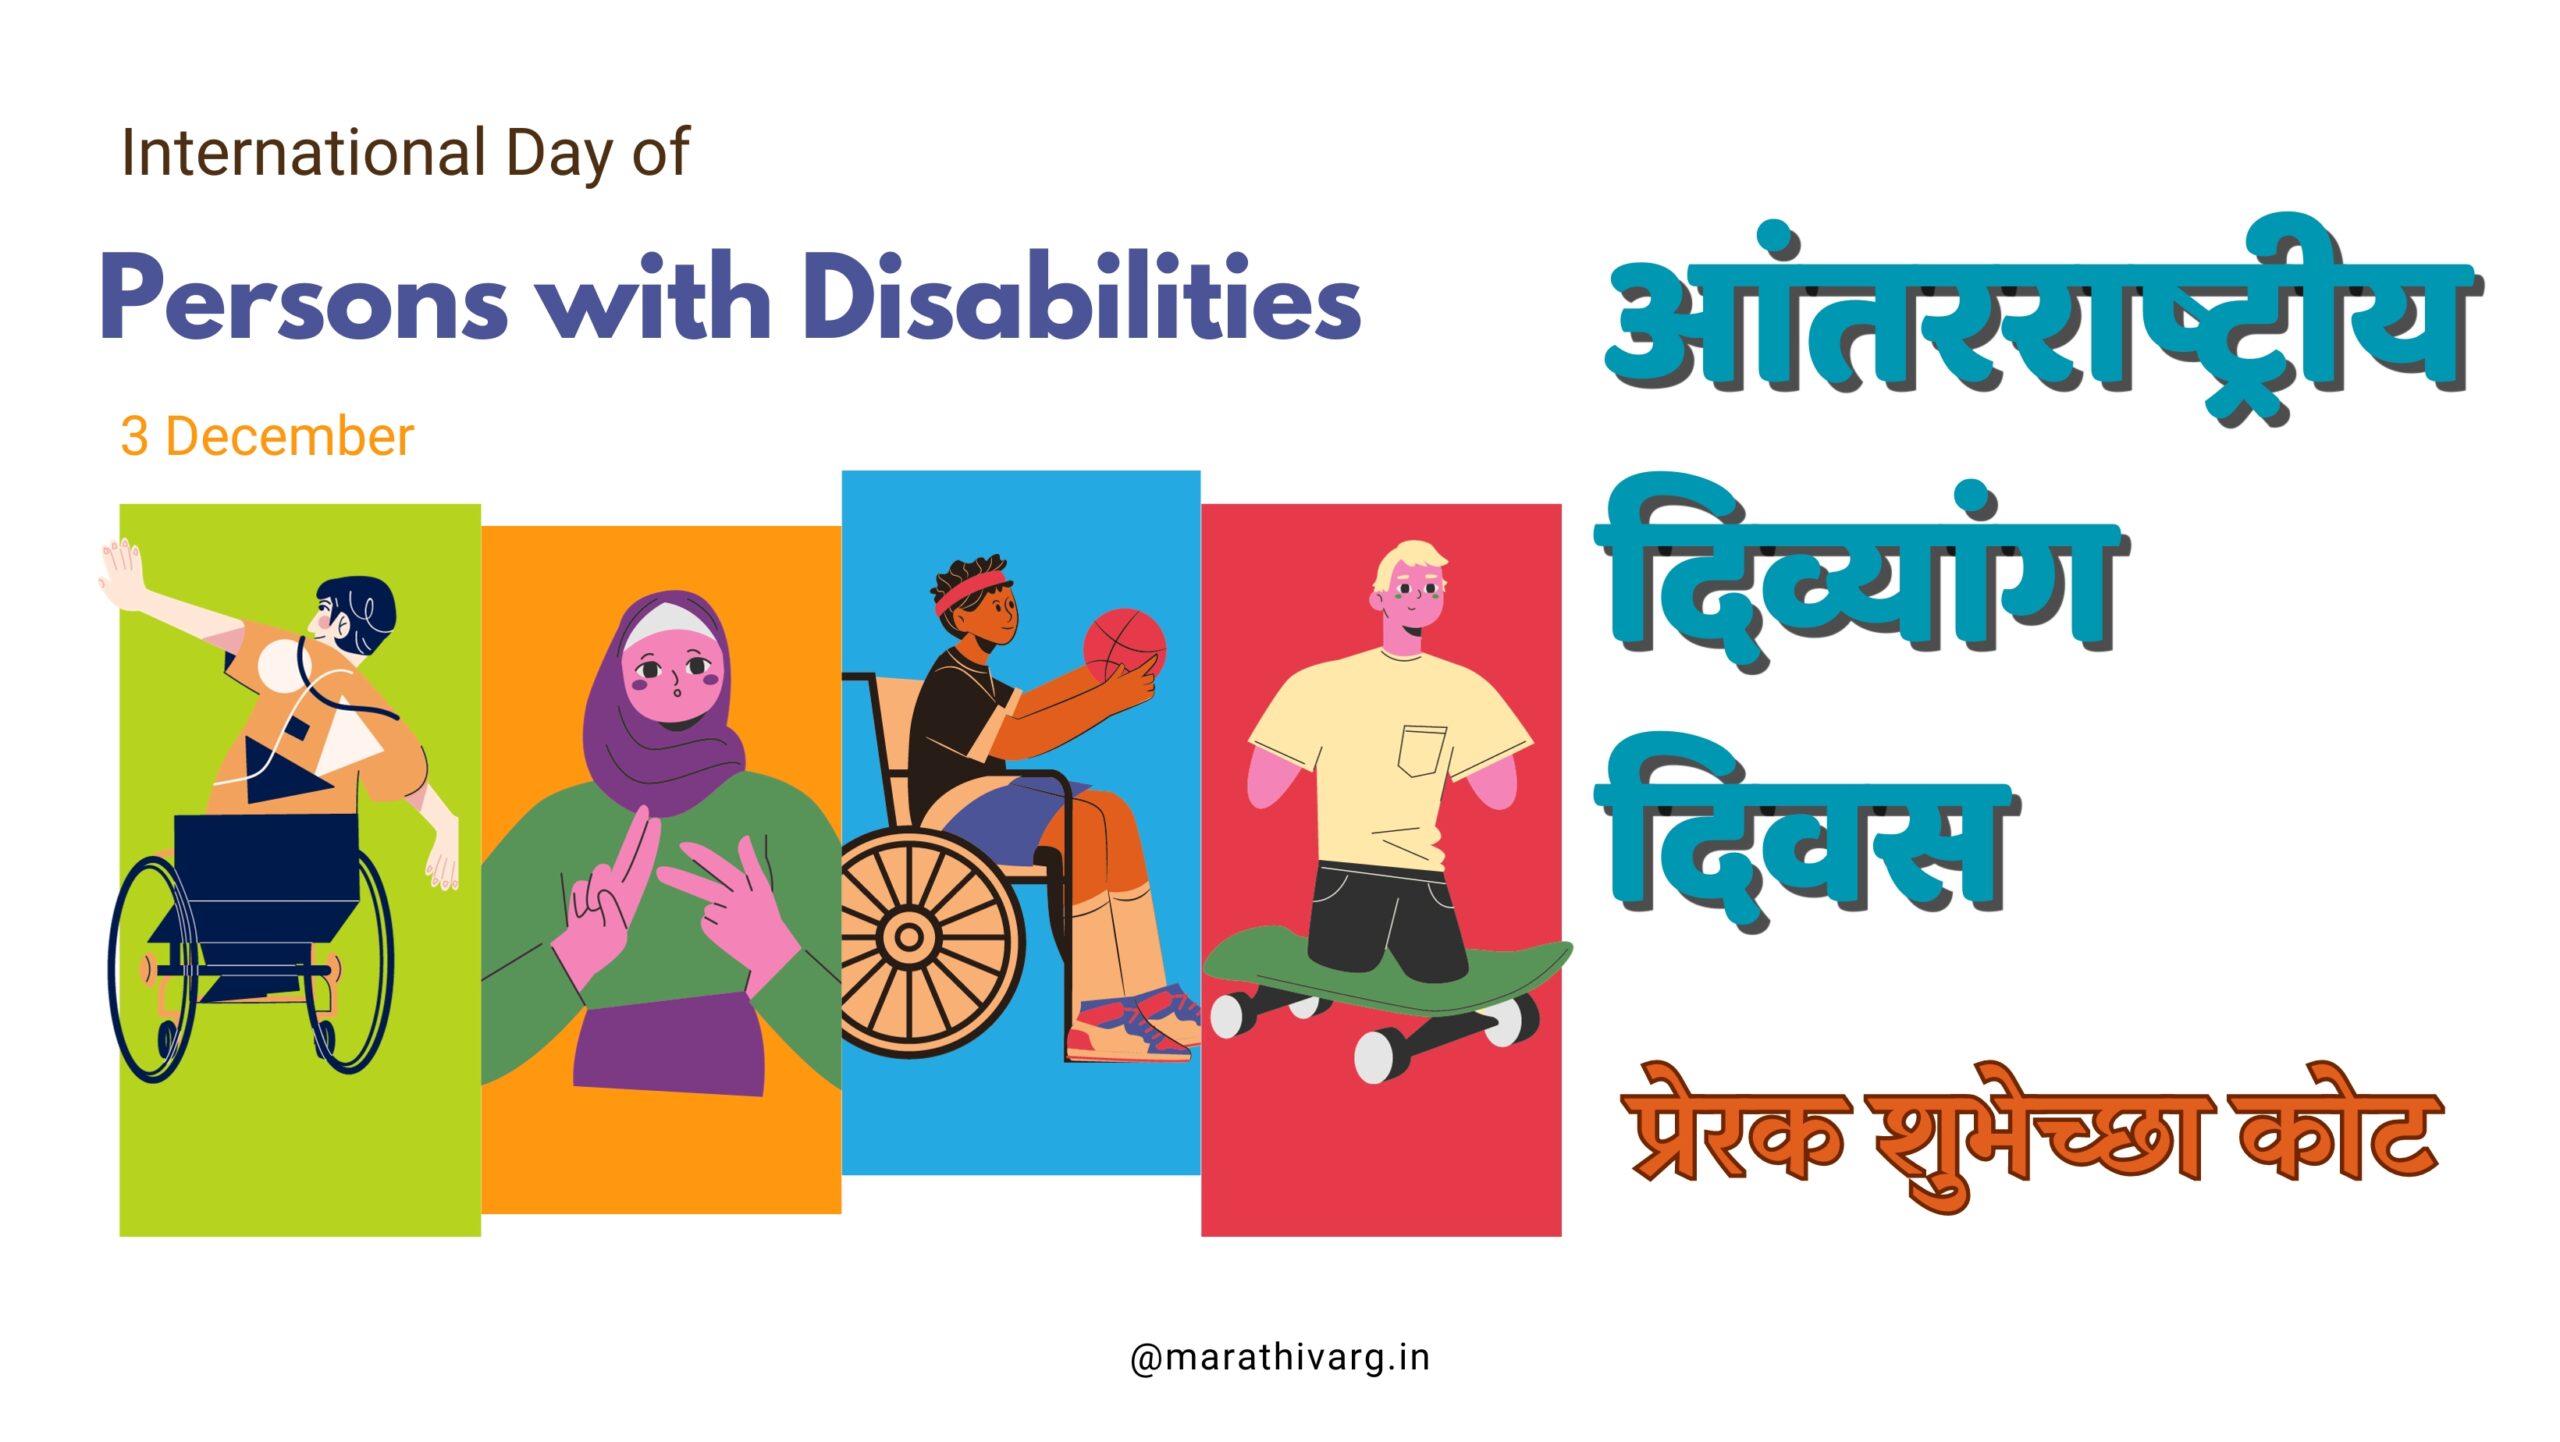 Empowering Abilities: Celebrating International Day of Persons with Disabilities